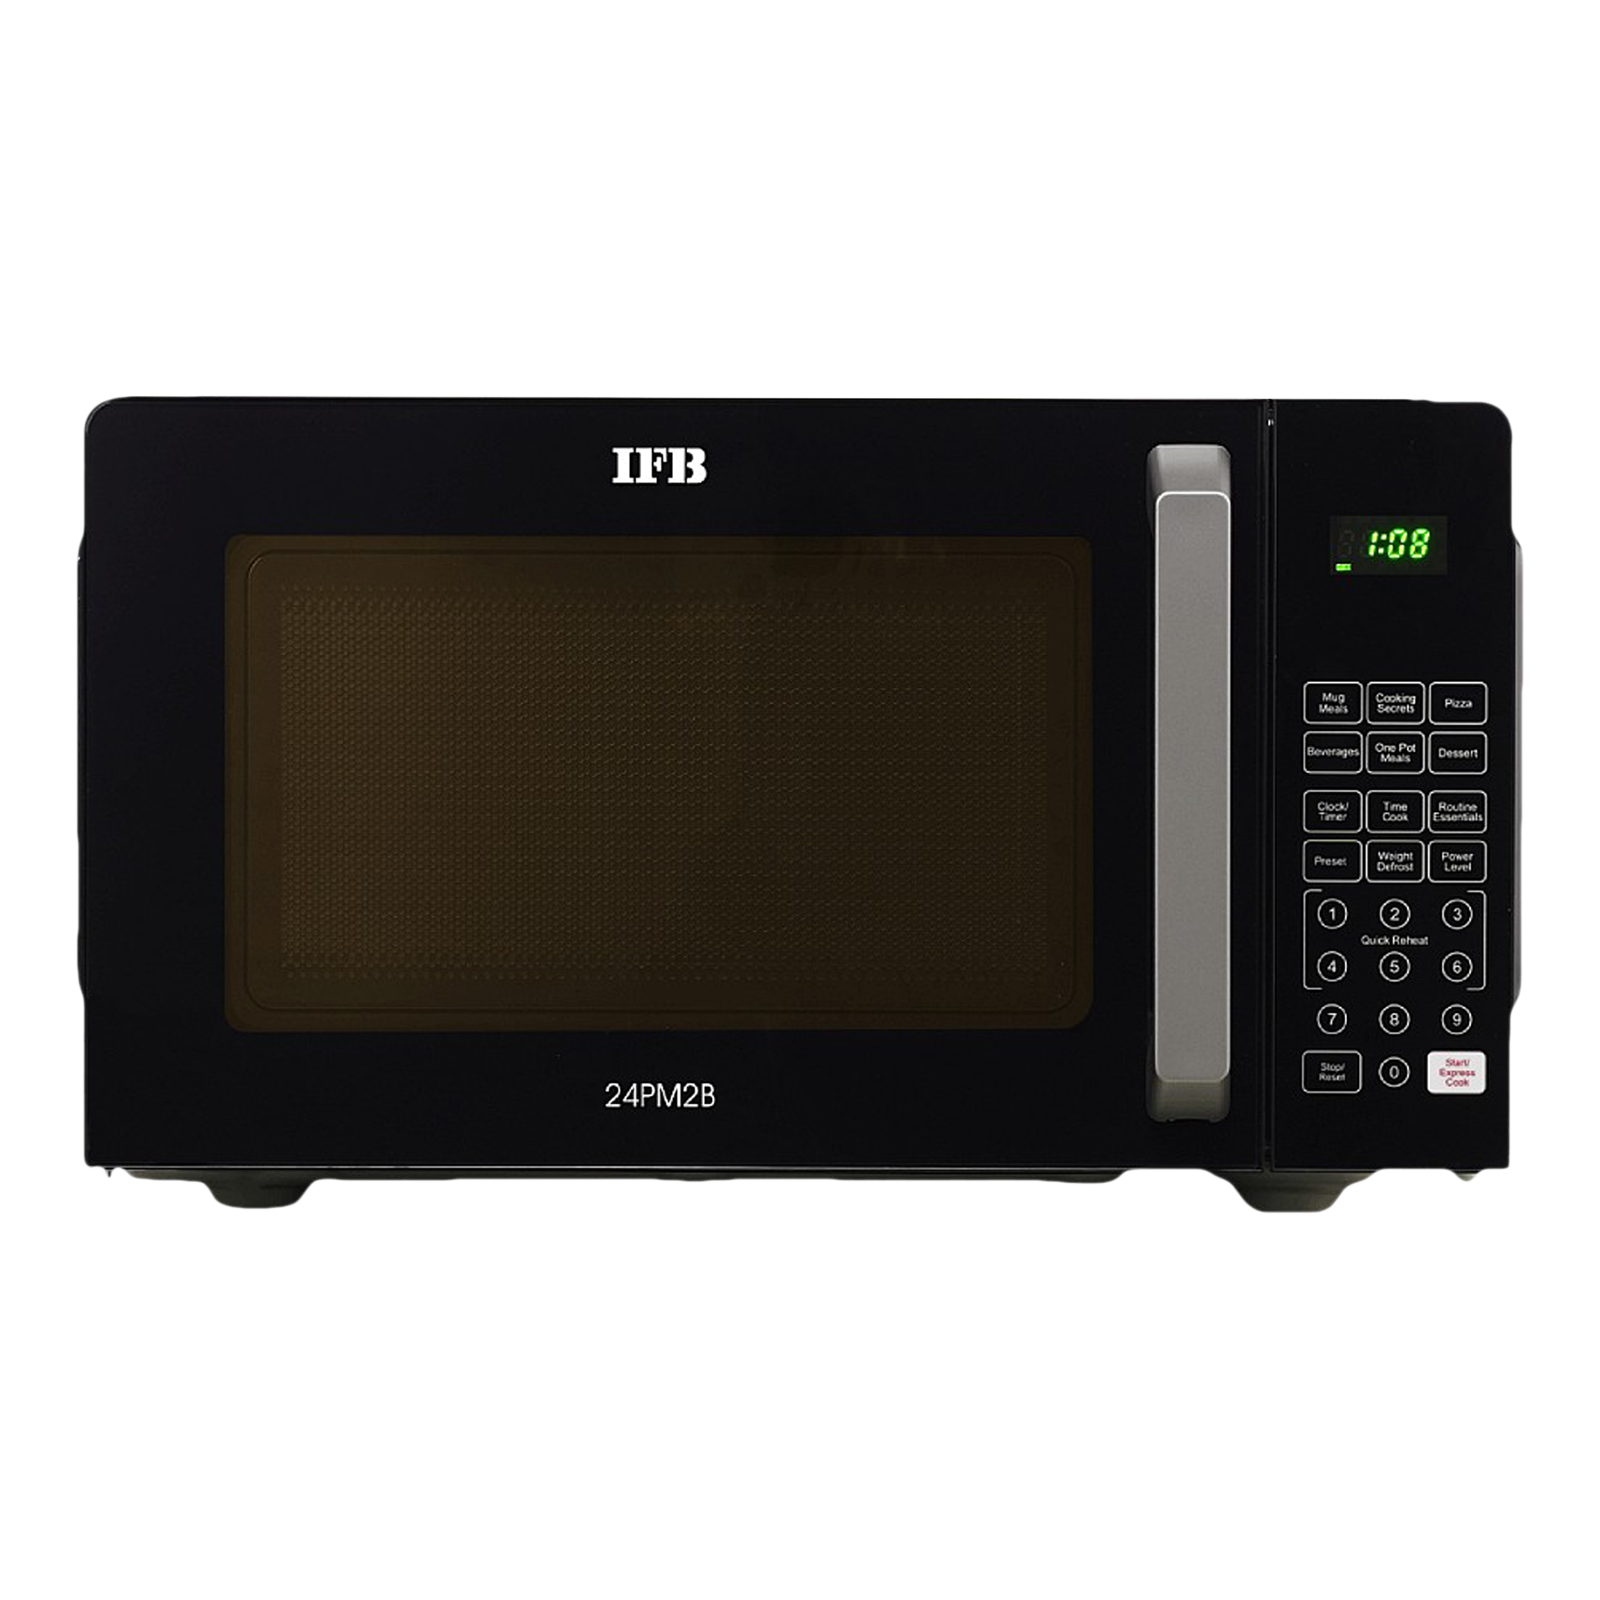 IFB 24PM2B 24L Solo Microwave Oven with Multi Stage Cooking (Black)